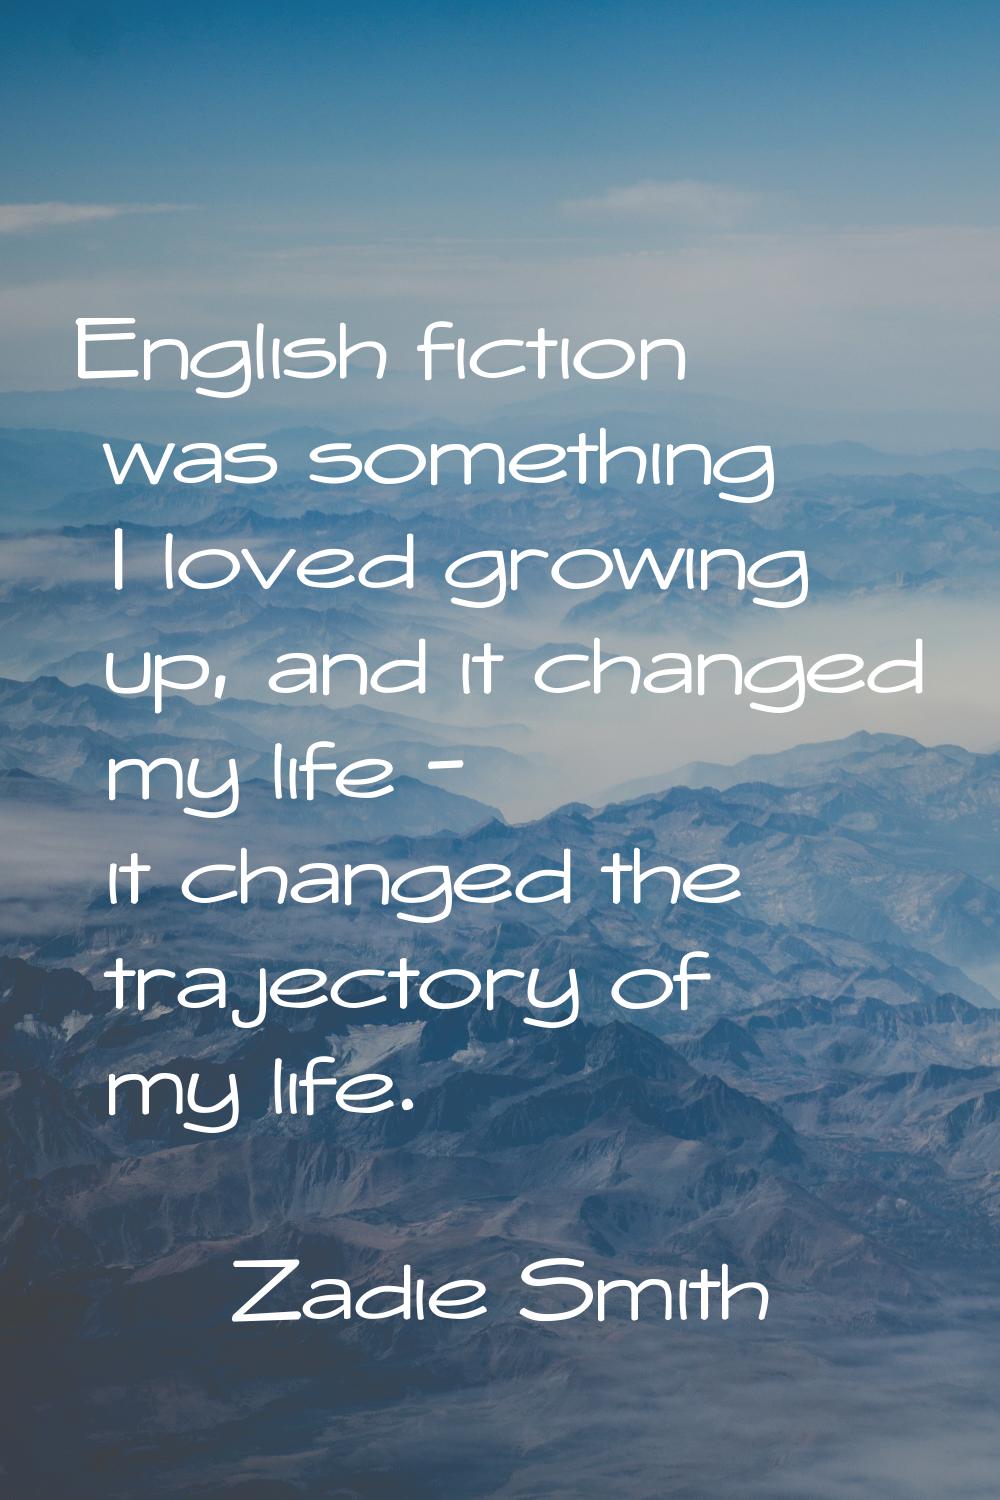 English fiction was something I loved growing up, and it changed my life - it changed the trajector